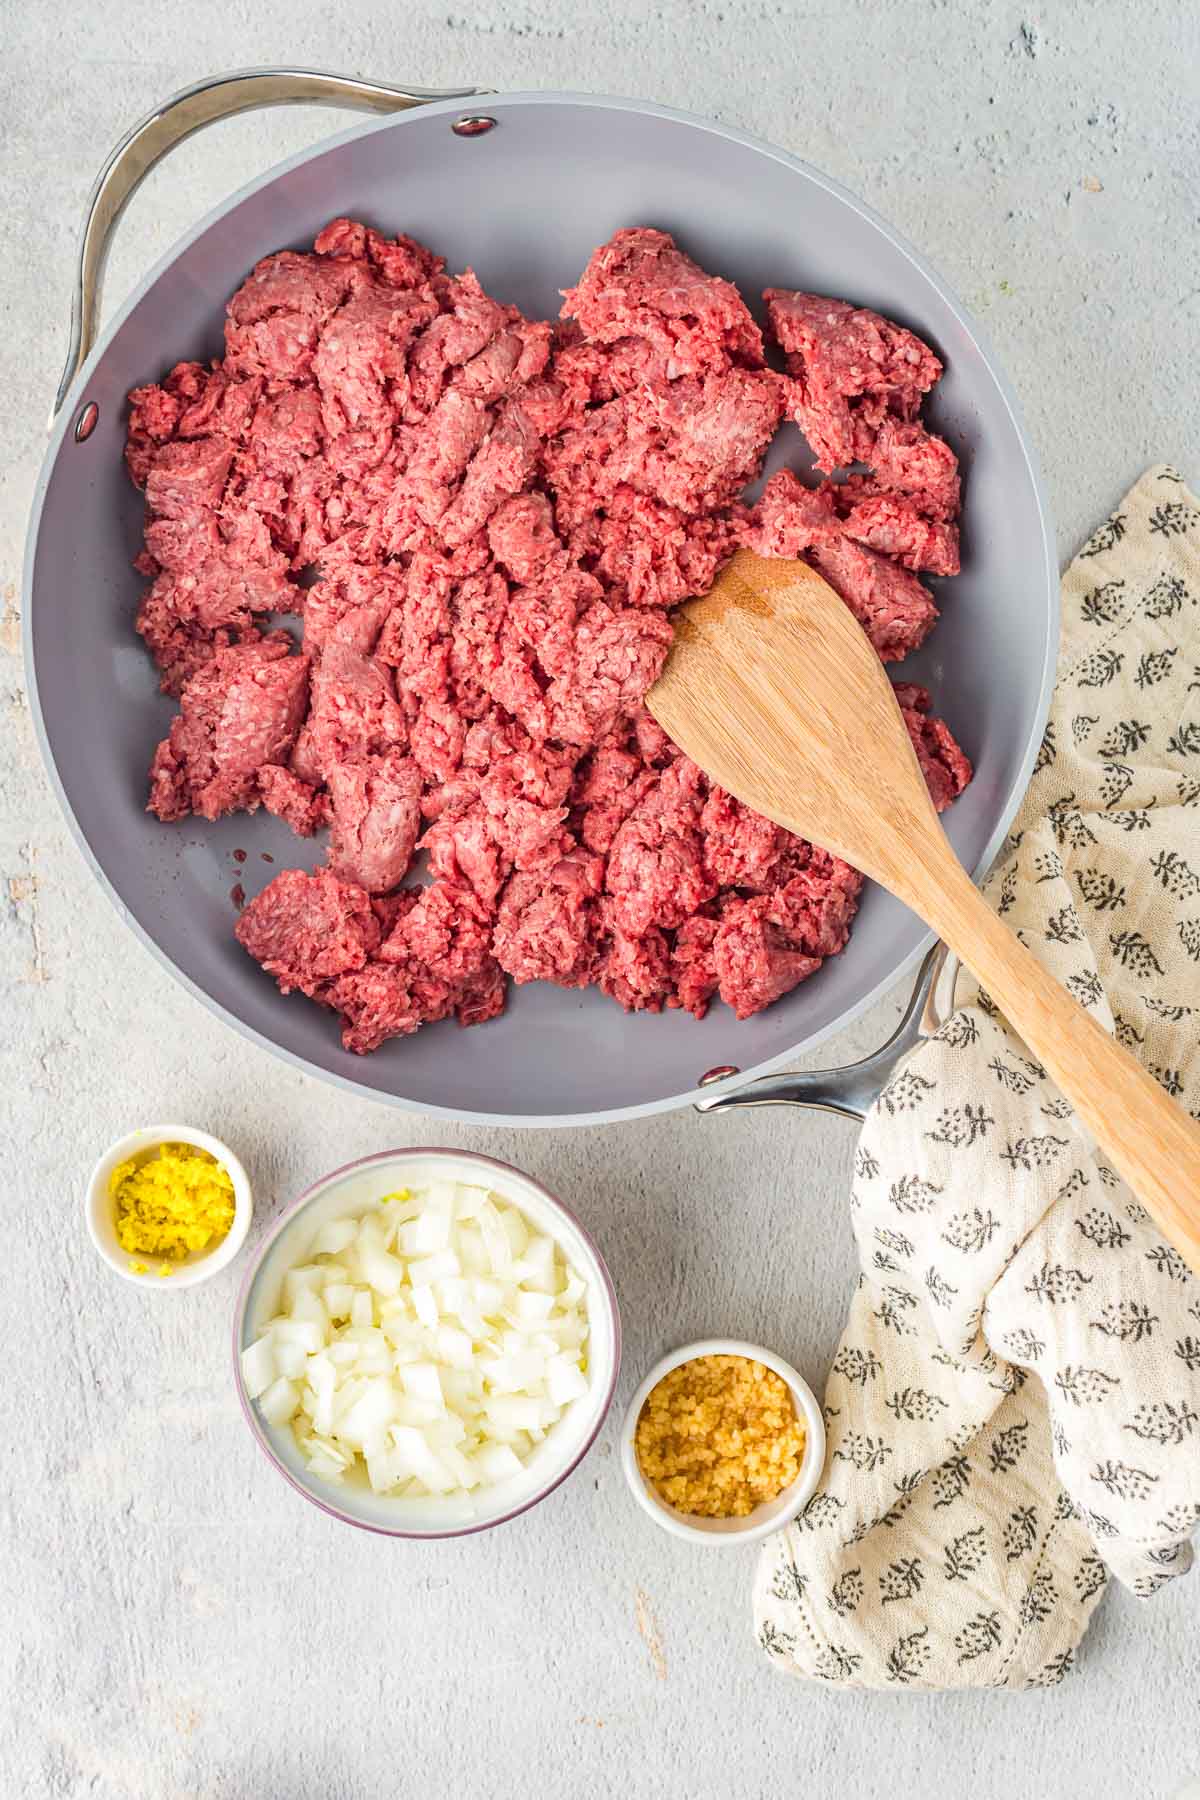 Skillet full of raw ground beef about to be cooked.